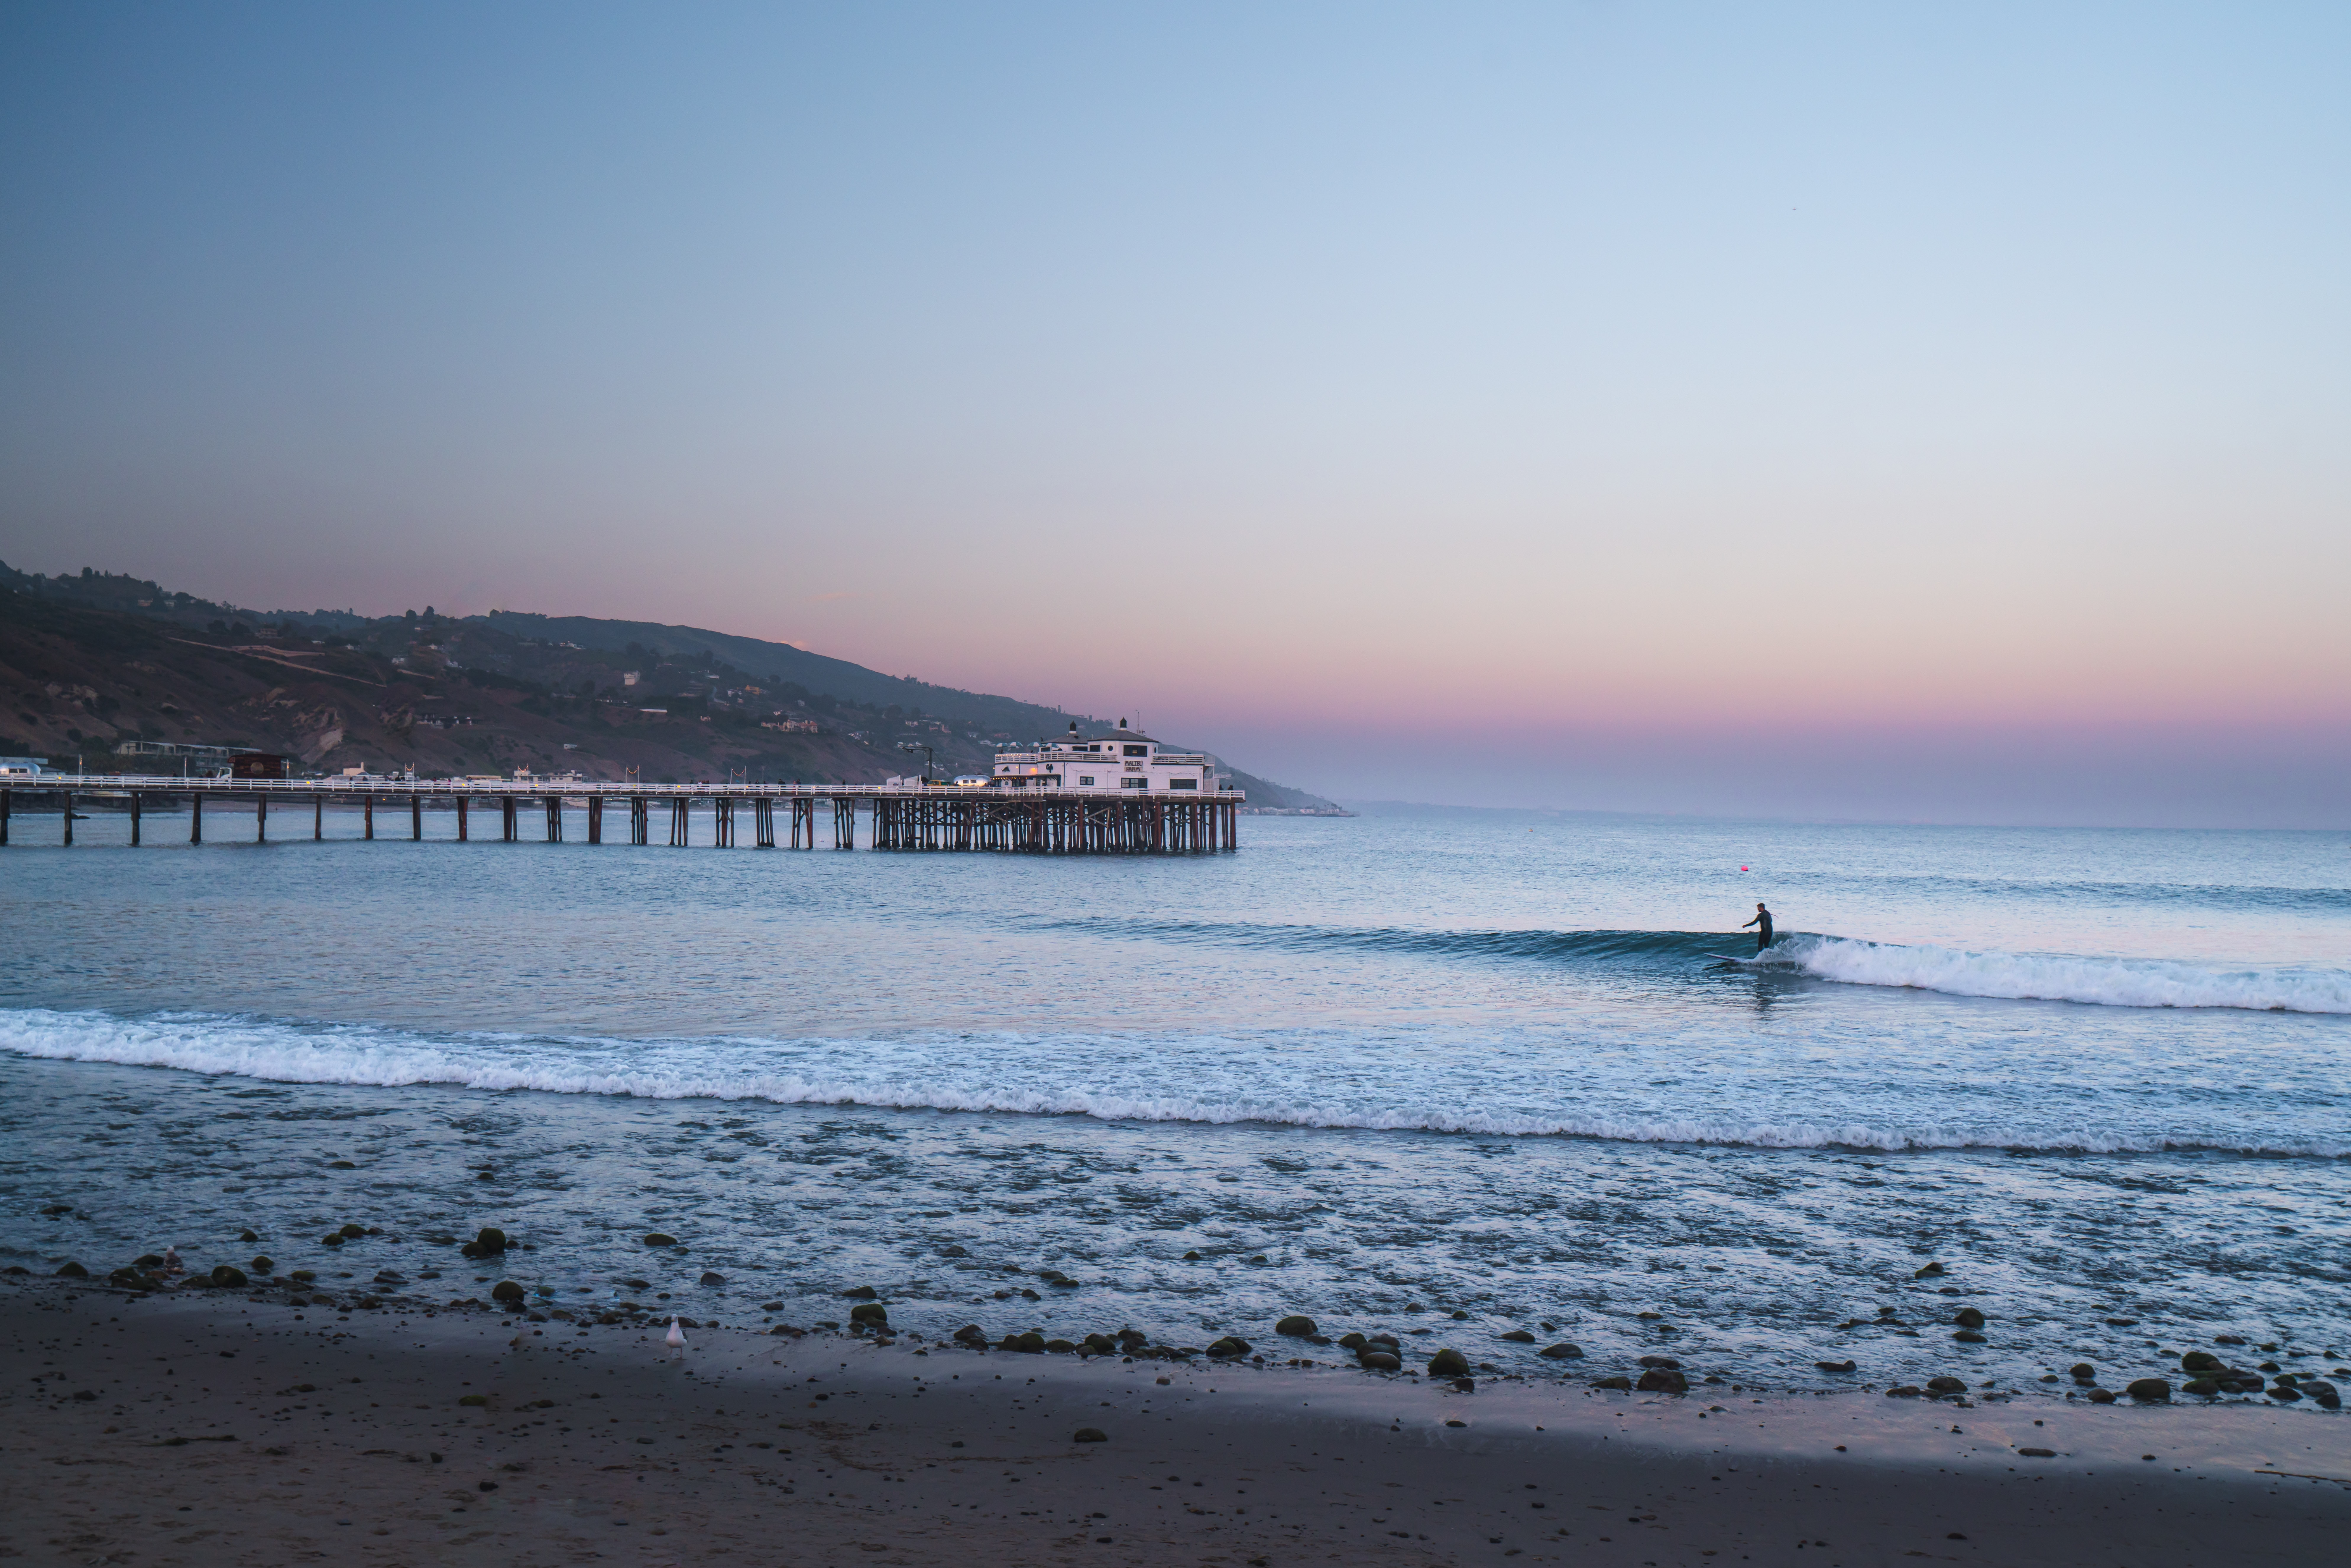 sunset and surfer at the malibu pier california